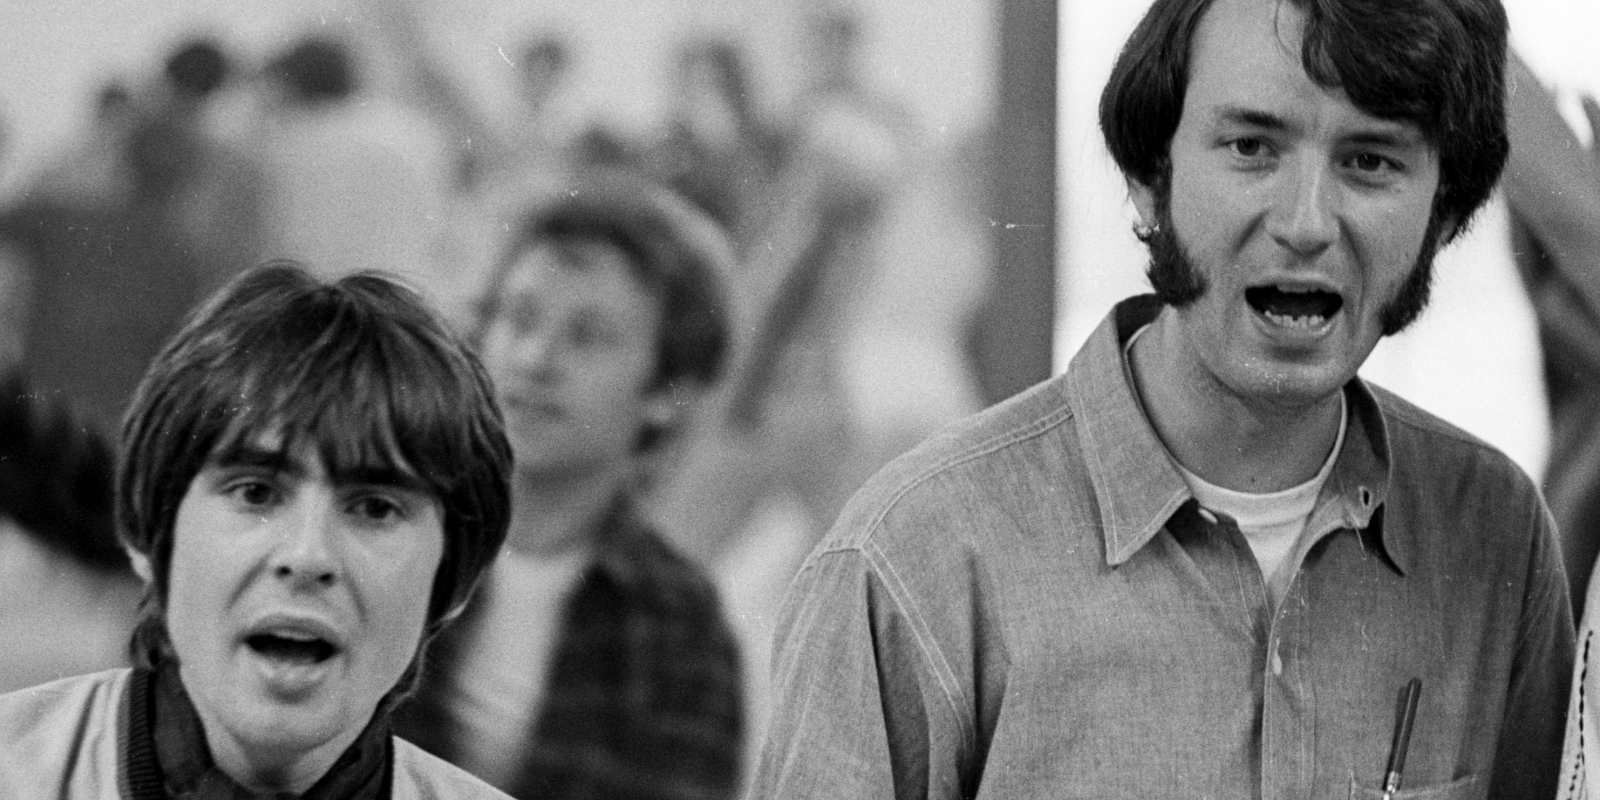 Davy Jones and Mike Nesmith photographed together in a black and white image.